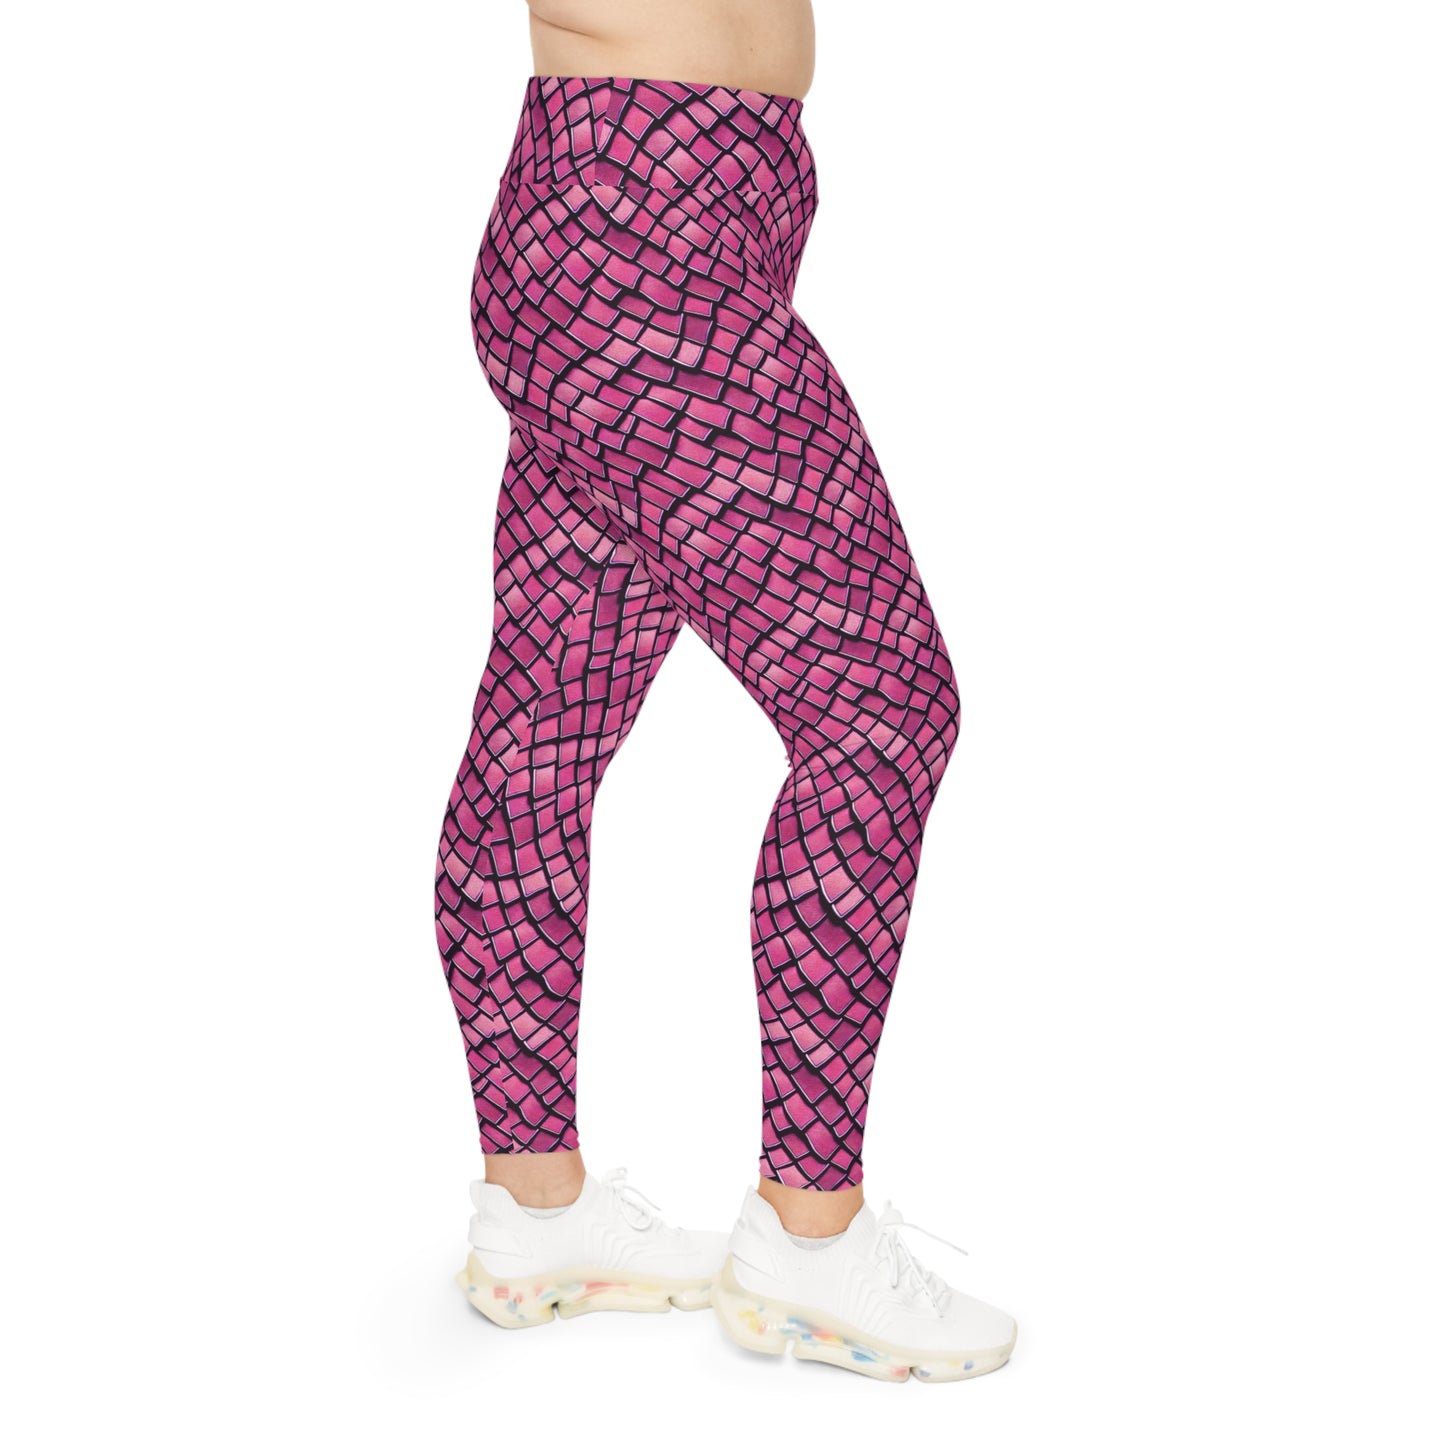 Plus Size Leggings Pink Dragon Scales Mermaid Ocean Inspired Design 4-Way Stretch, High-Rise Waistband, UPF 50+, Beach, Pool, Workout, Gym